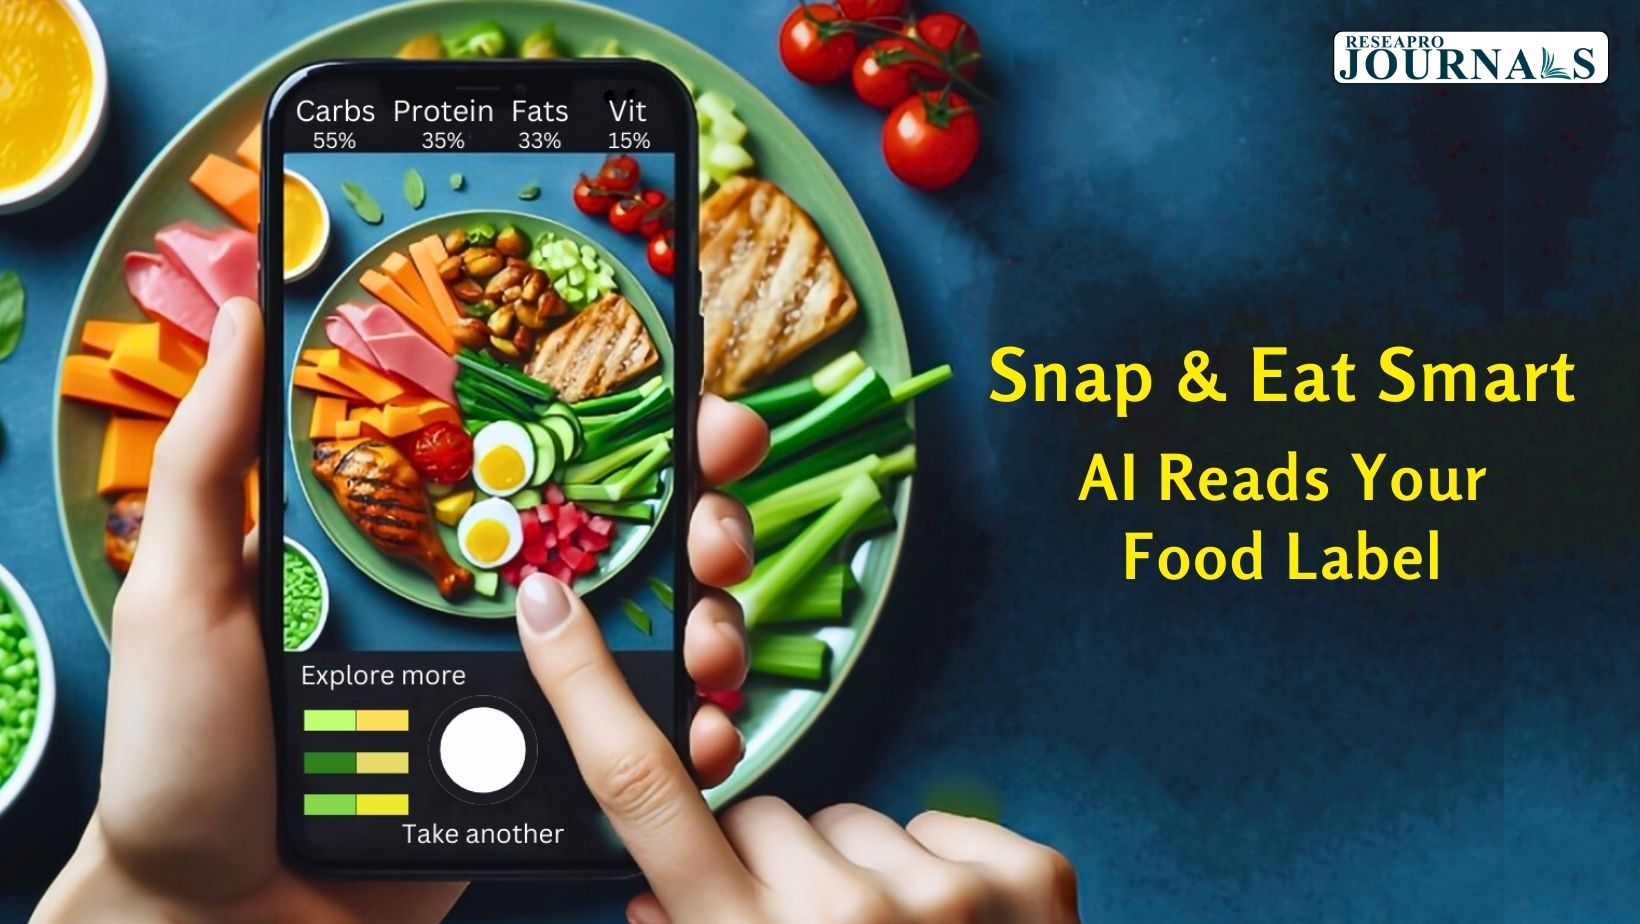 Snap & Eat Smart: AI Reads Your Food Label